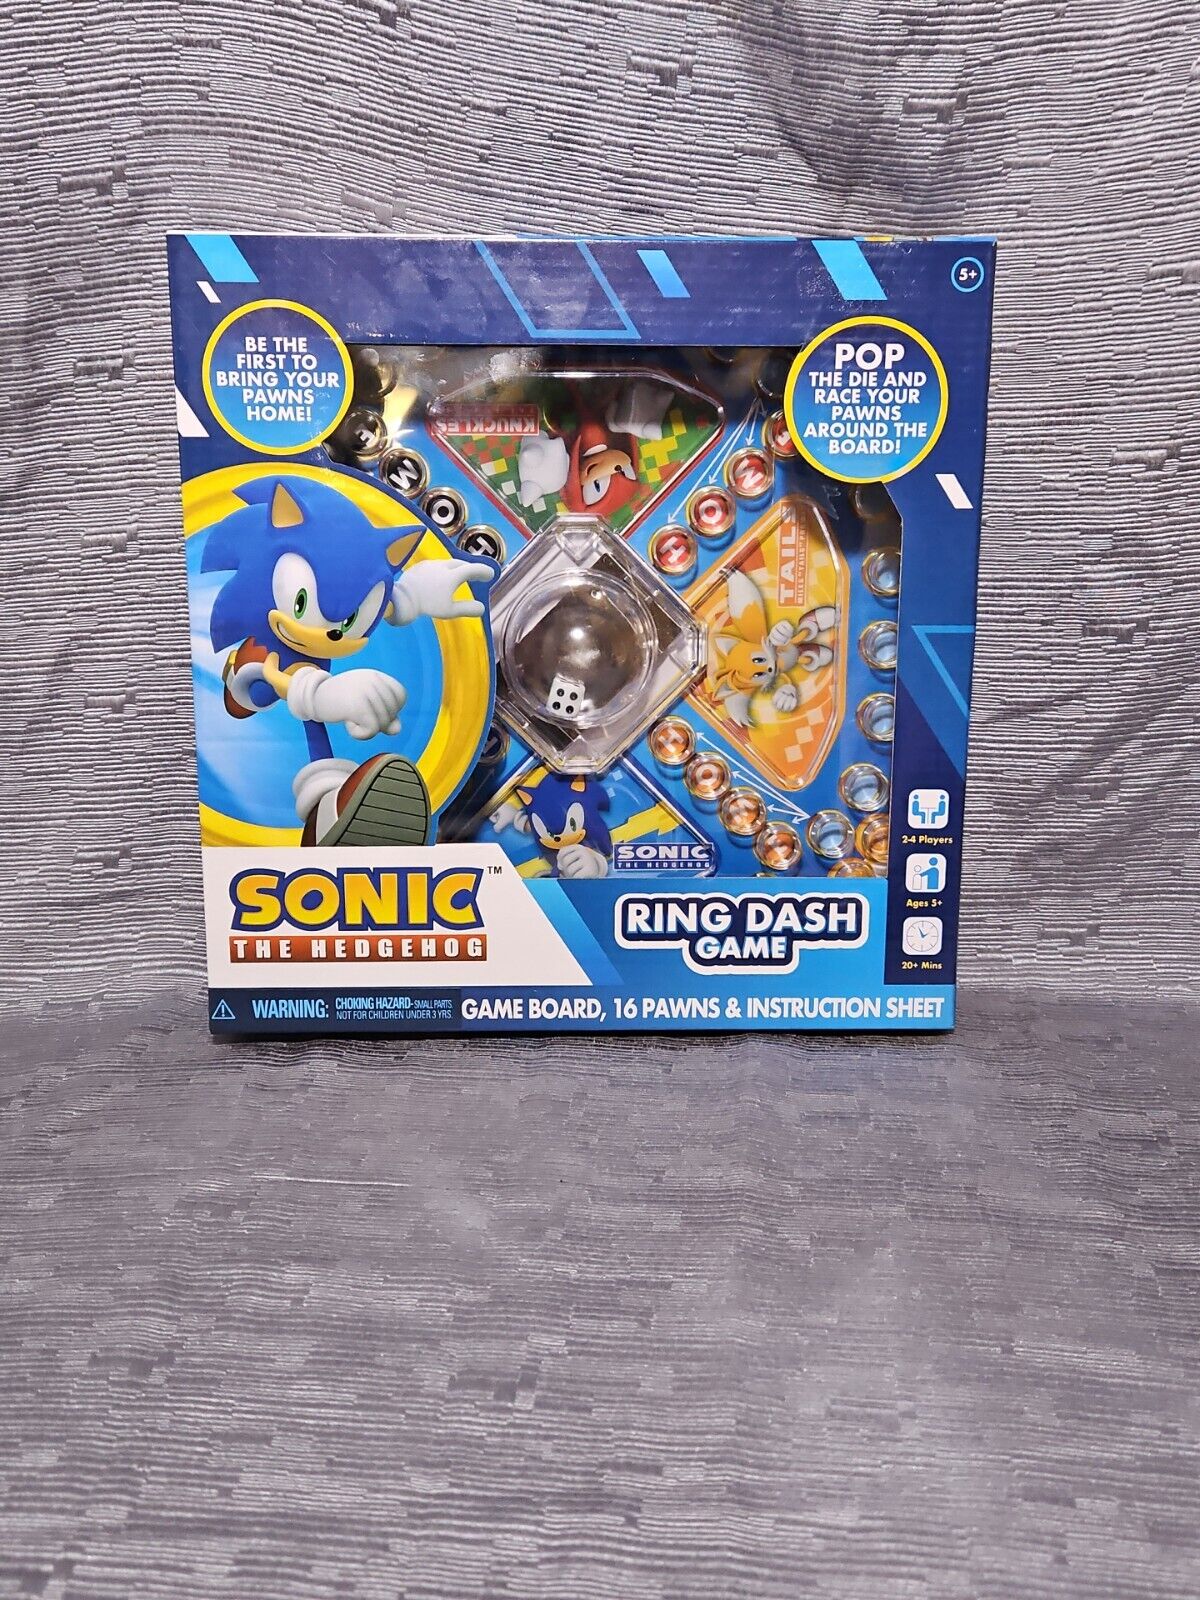 Sonic The Hedgehog: Sonic Rings With Motion Sounds - 416984-PB - BRAND NEW